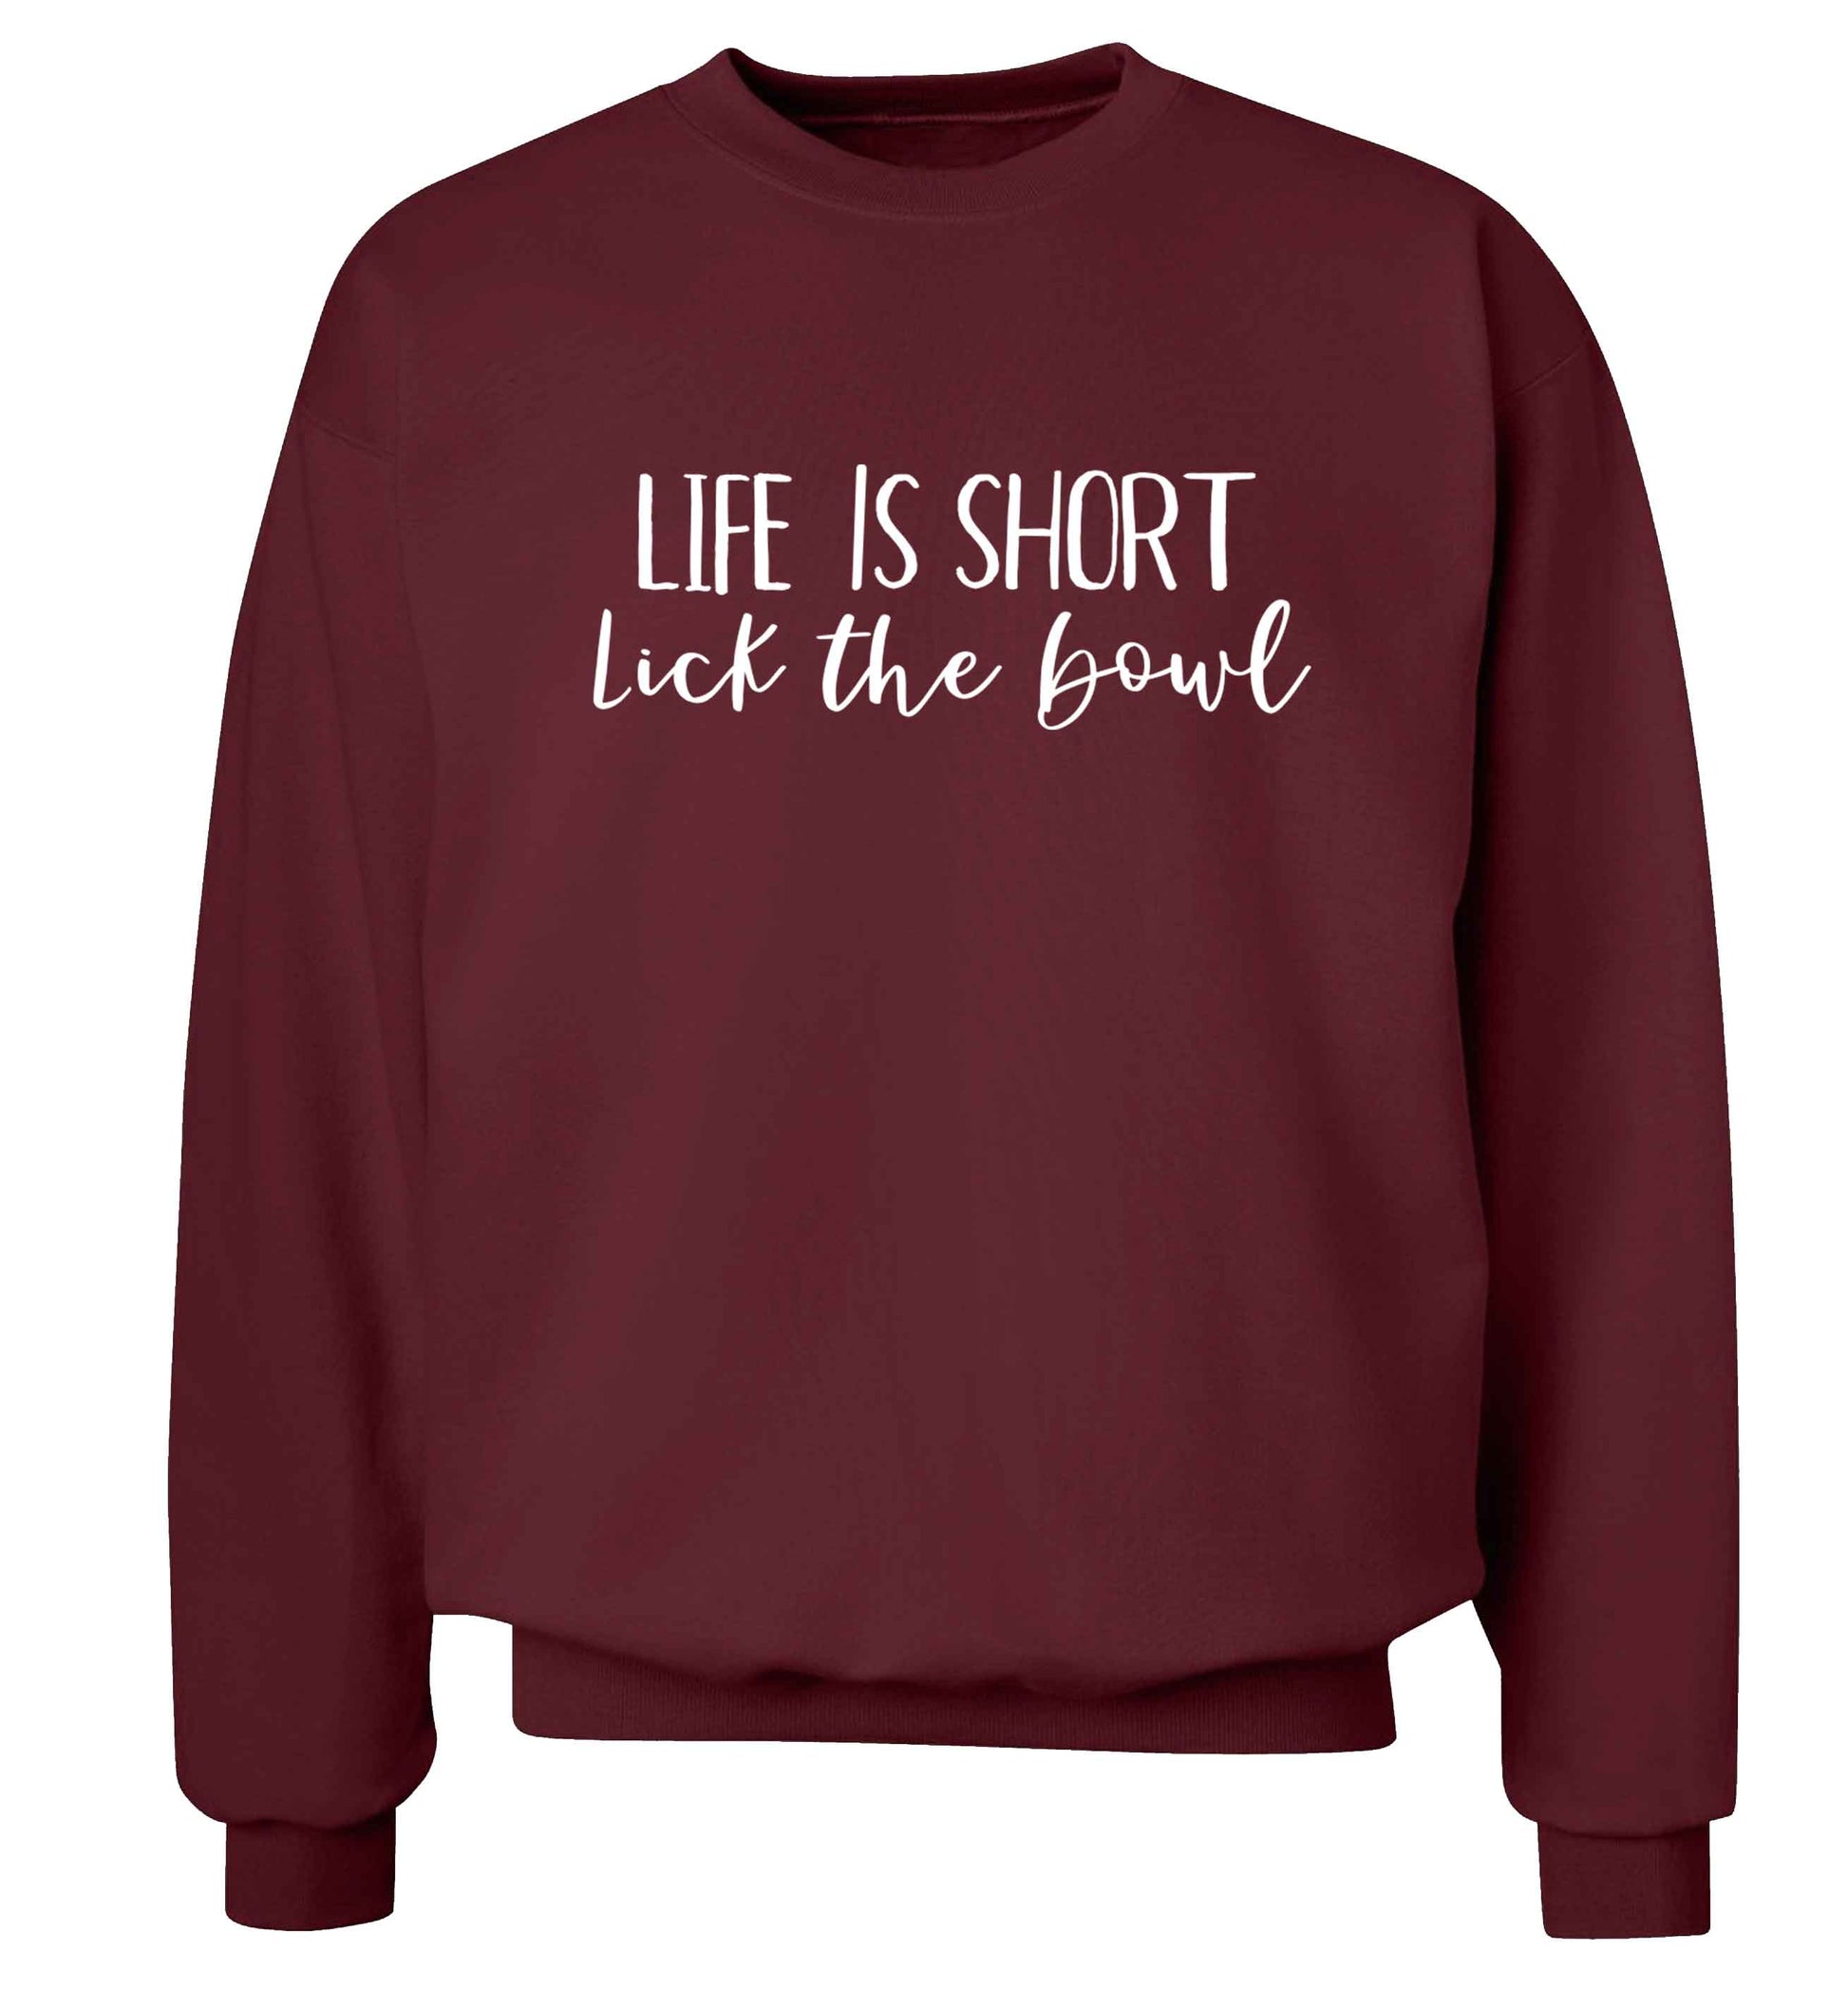 Life is short lick the bowl Adult's unisex maroon Sweater 2XL